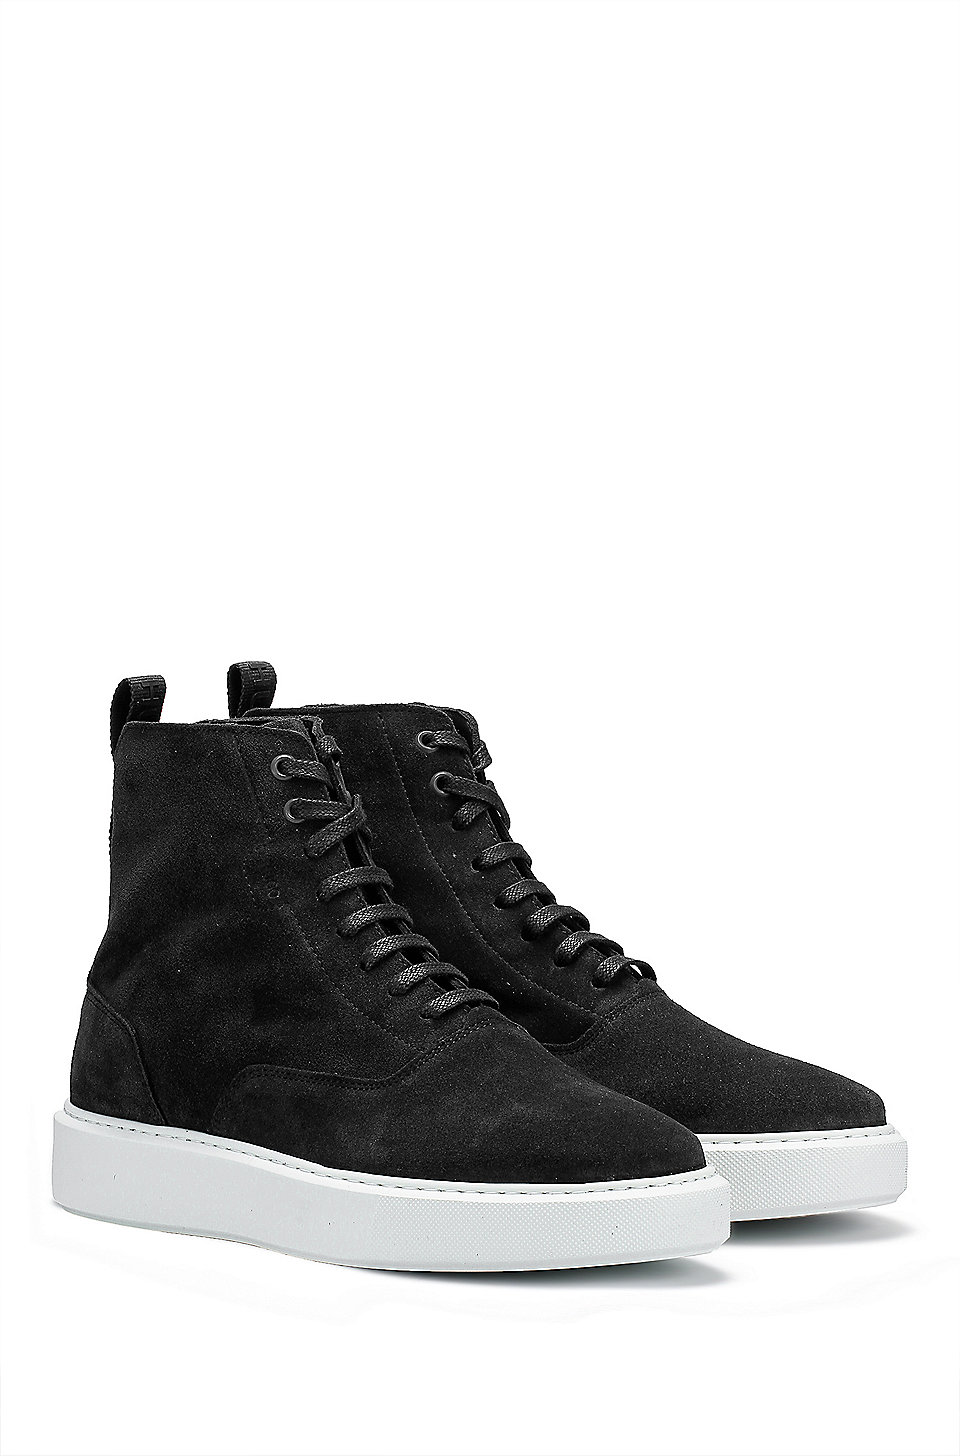 HUGO - Half-boots in suede with logo details